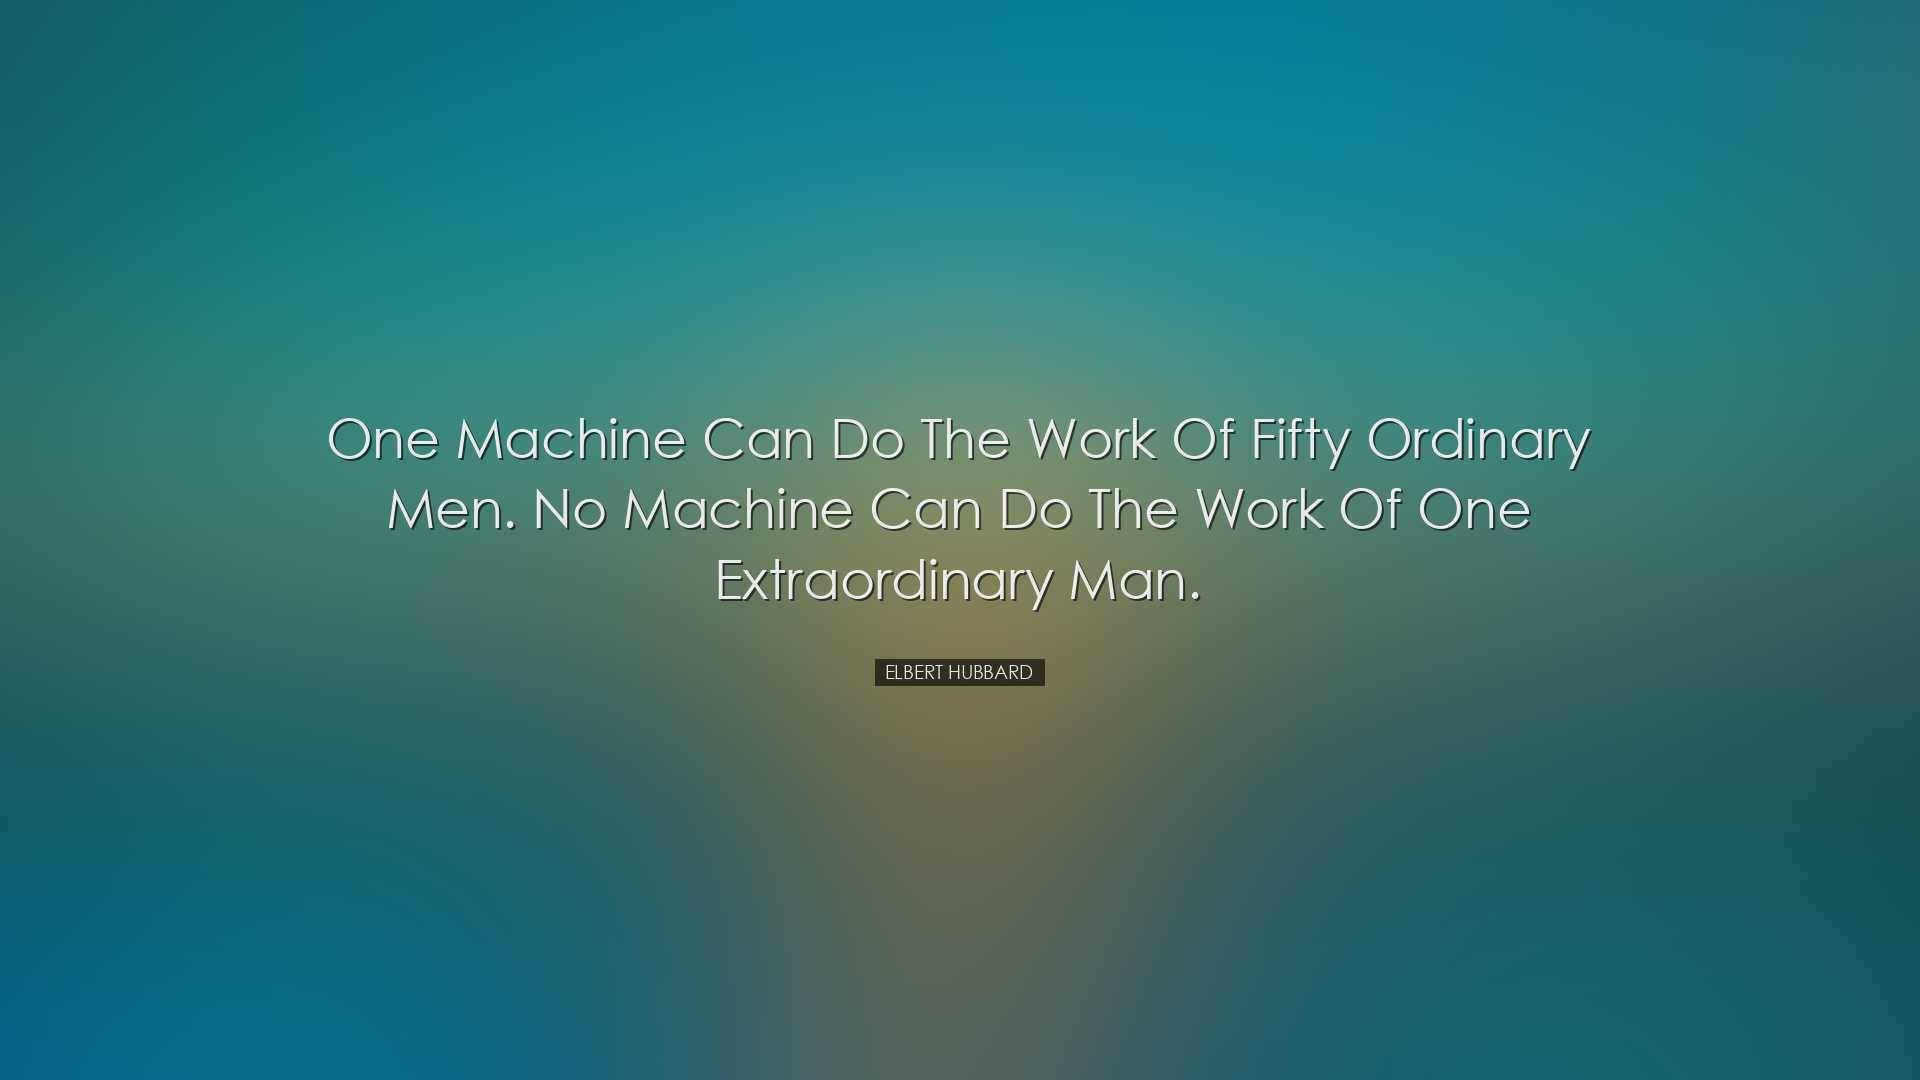 One machine can do the work of fifty ordinary men. No machine can